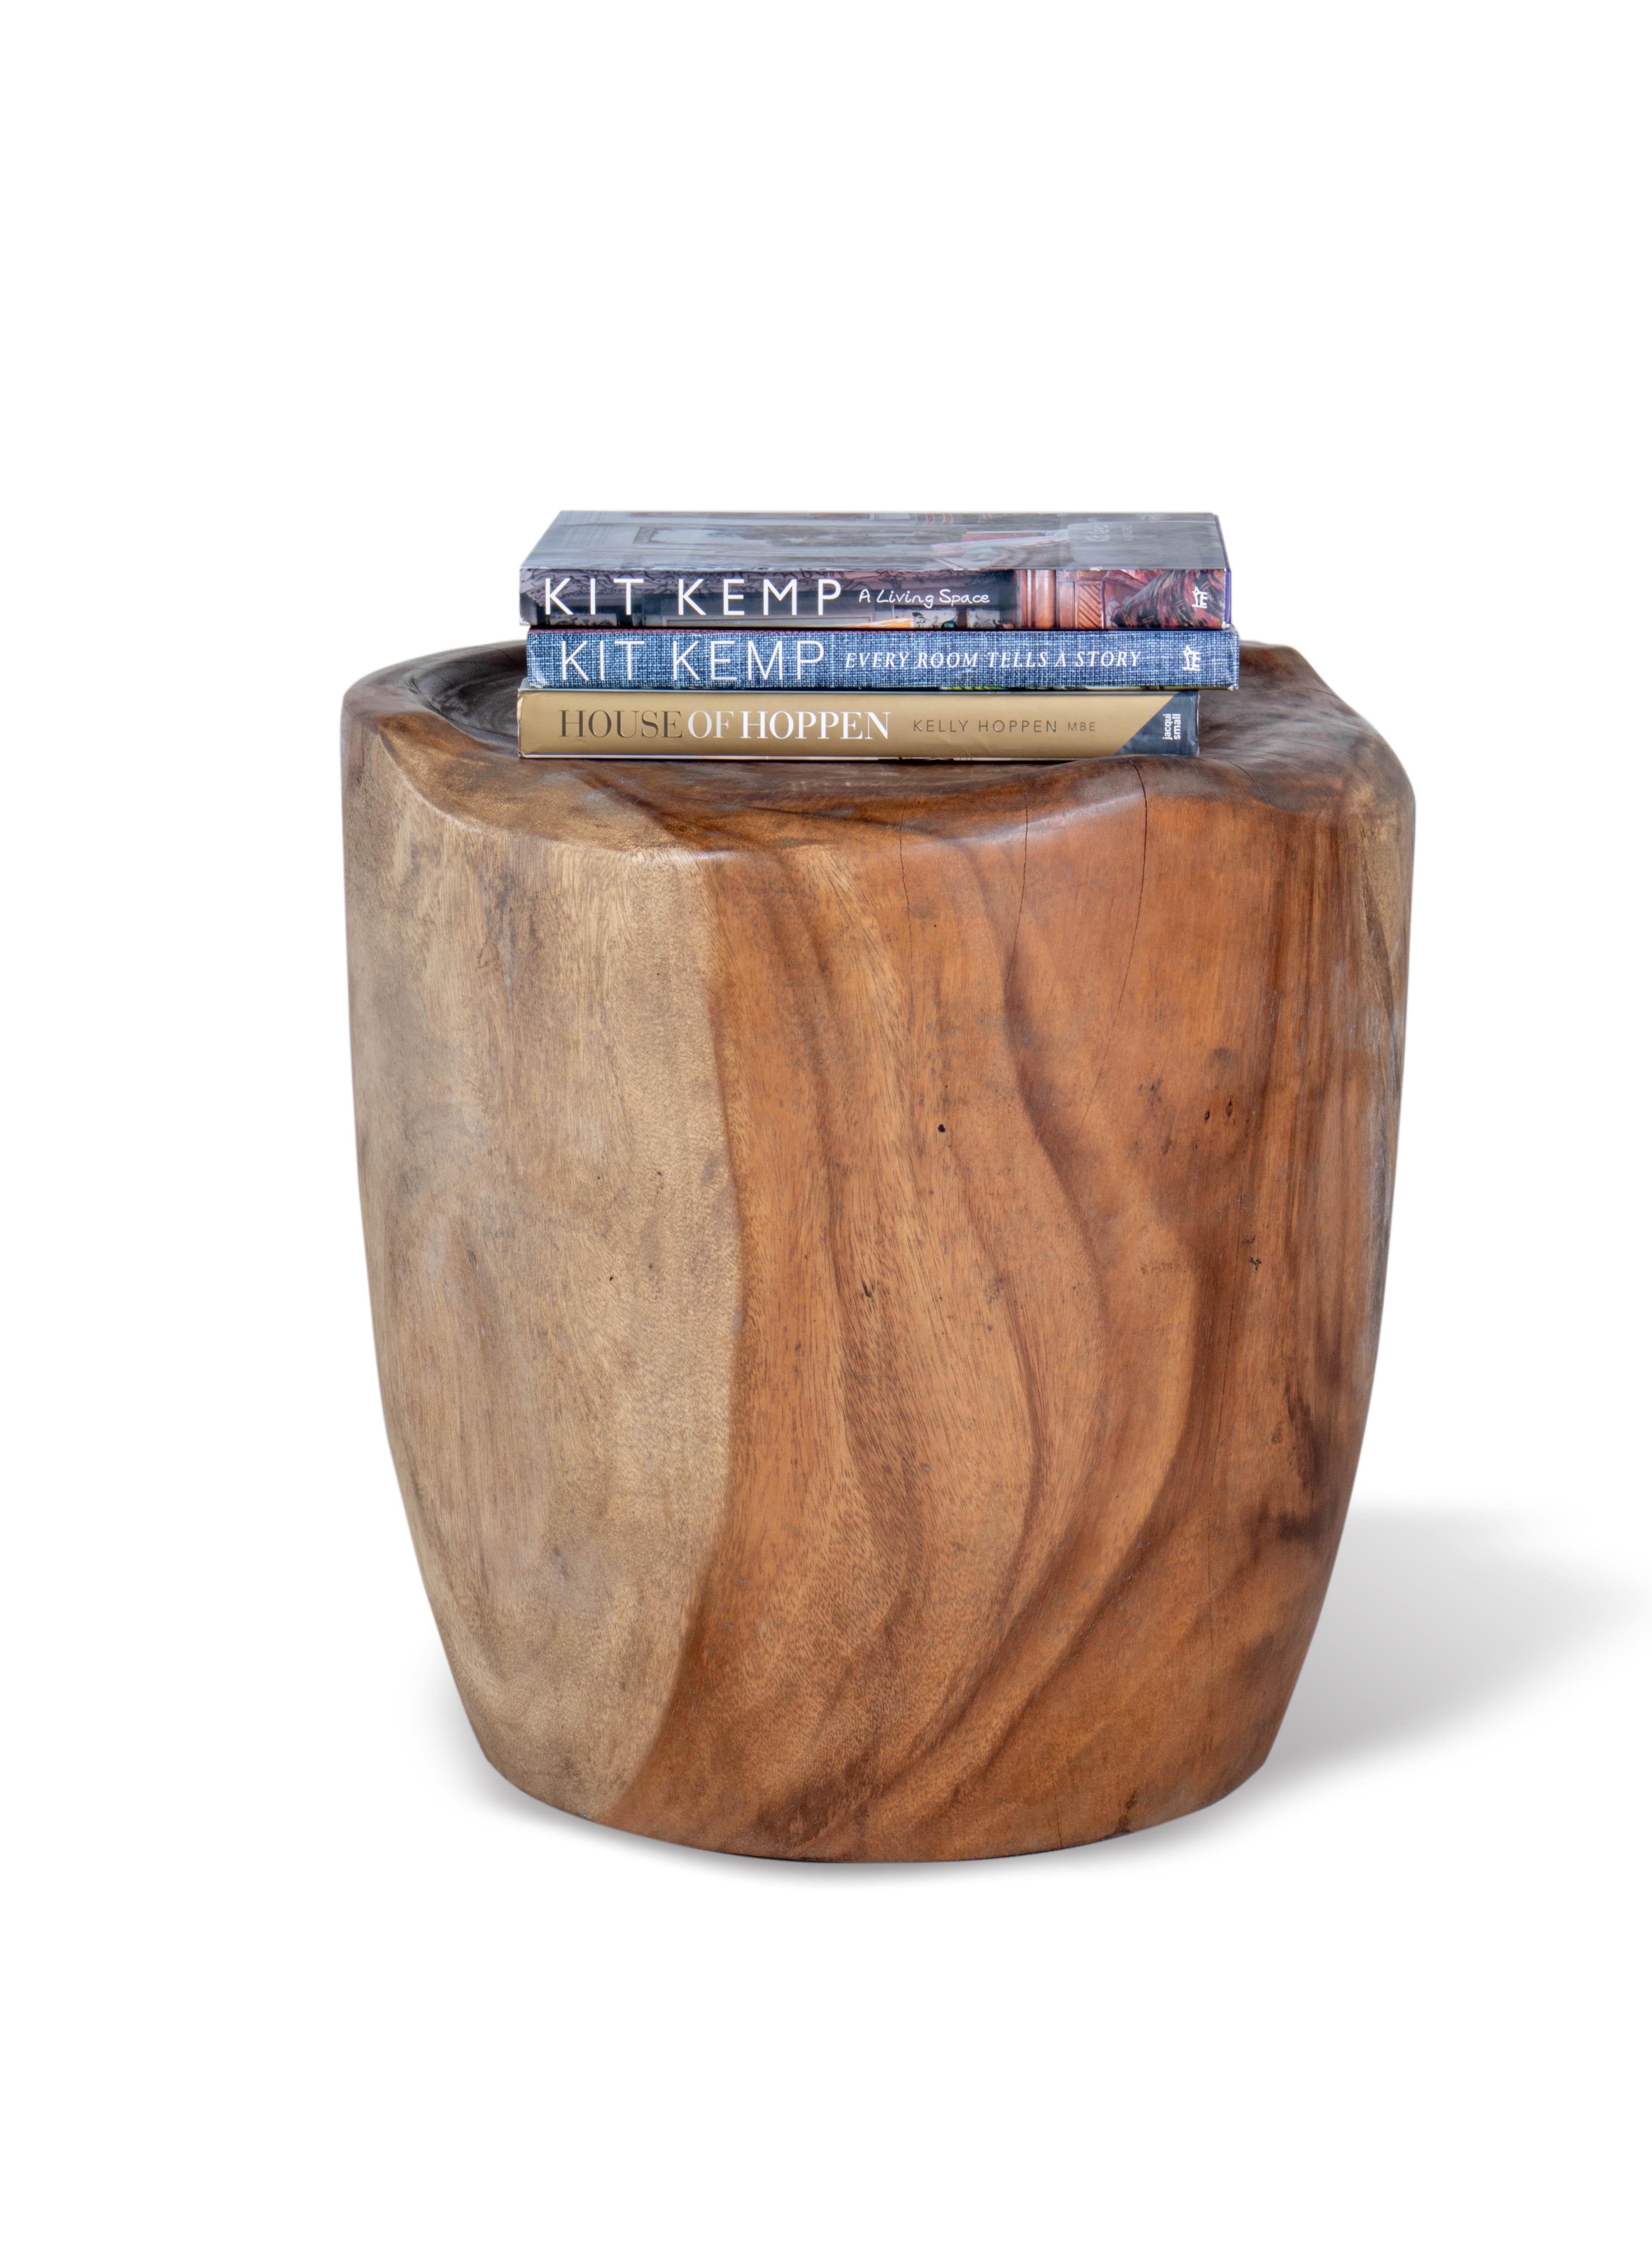 This is a stool that is made out of a solid piece of lychee wood. It has been sculpted into a beautiful and smooth base and comforable seat. The stool is perfect for use as a side table or as extra seating in a living room or bedroom. It would also